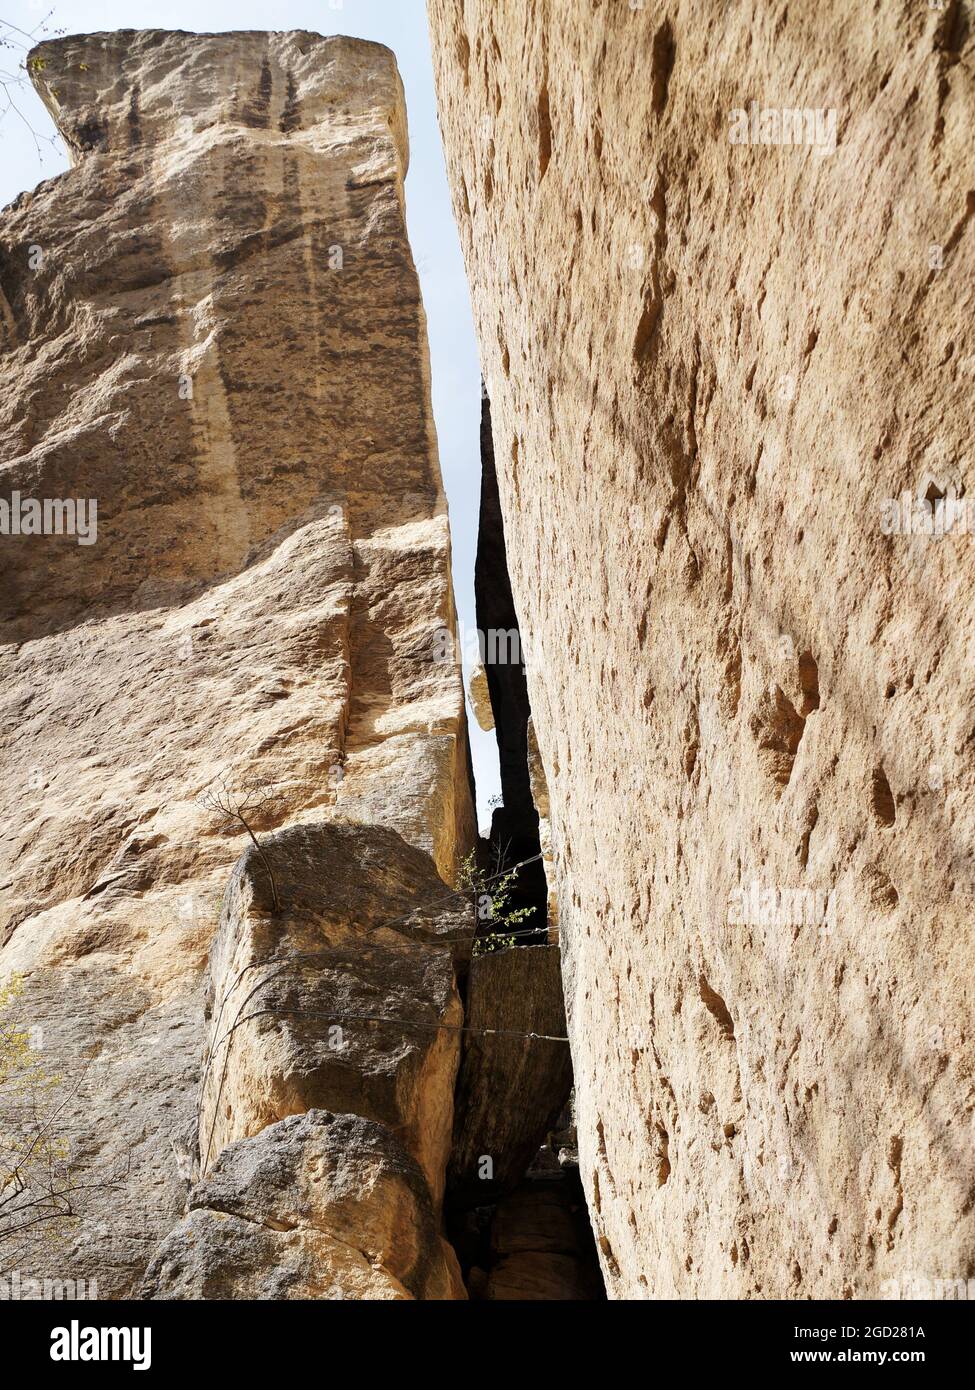 a narrow cleft in the rocks close-up. Stock Photo